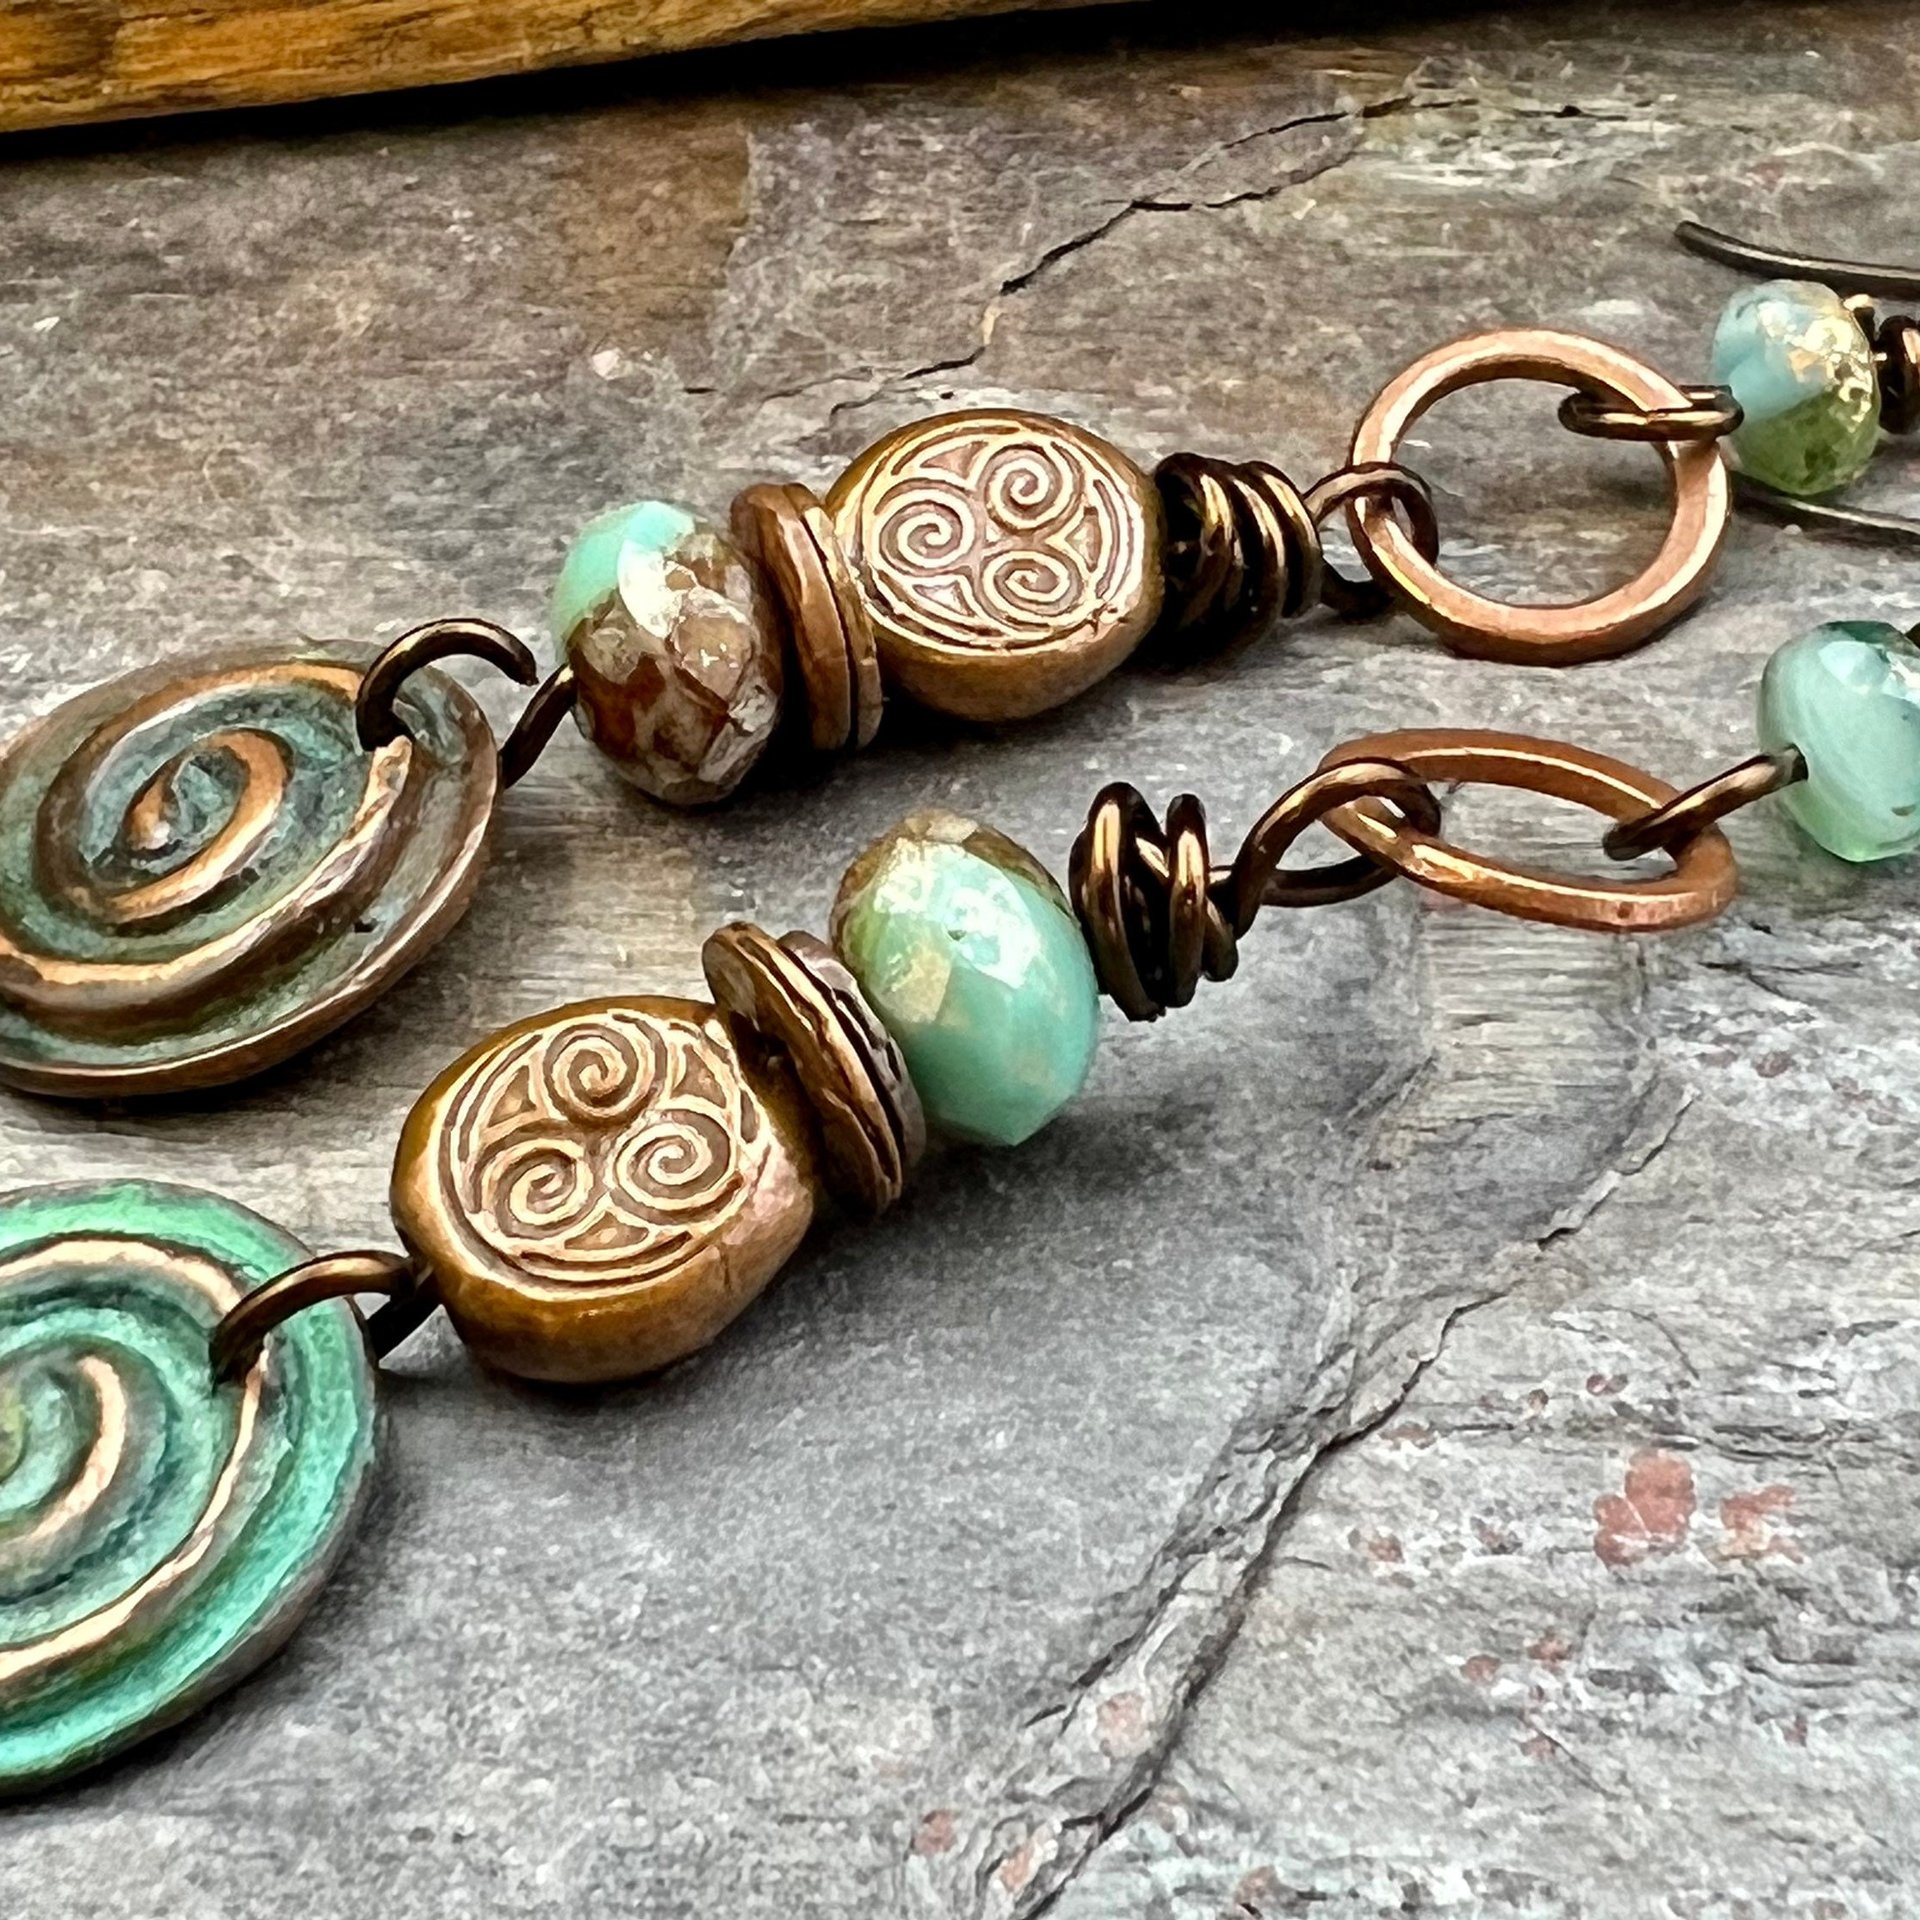 Copper Patina Spiral Earrings, Stacked Cairns, Spiral Beads, Czech Glass Beads, Hypoallergenic Ear Wires, Earthy, Arty Mismatched Earrings